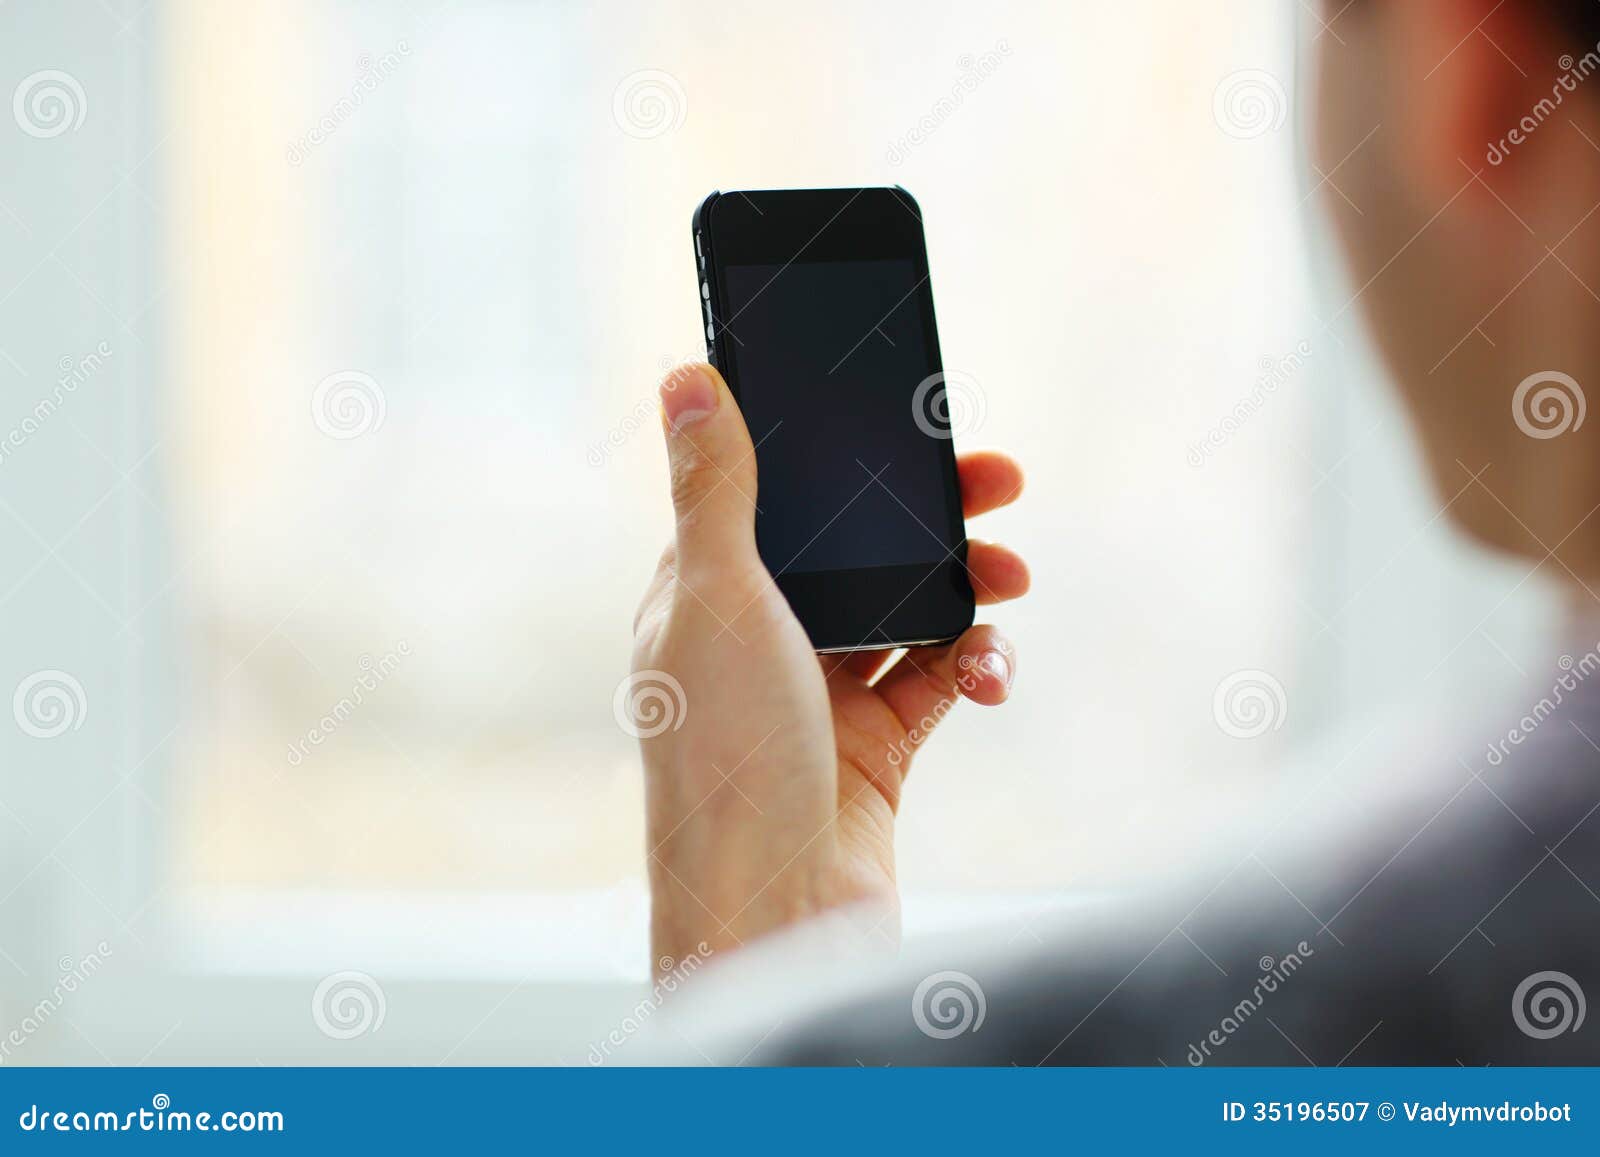 Man Looking at Blank Smartphone Display Stock Image - Image of person ...